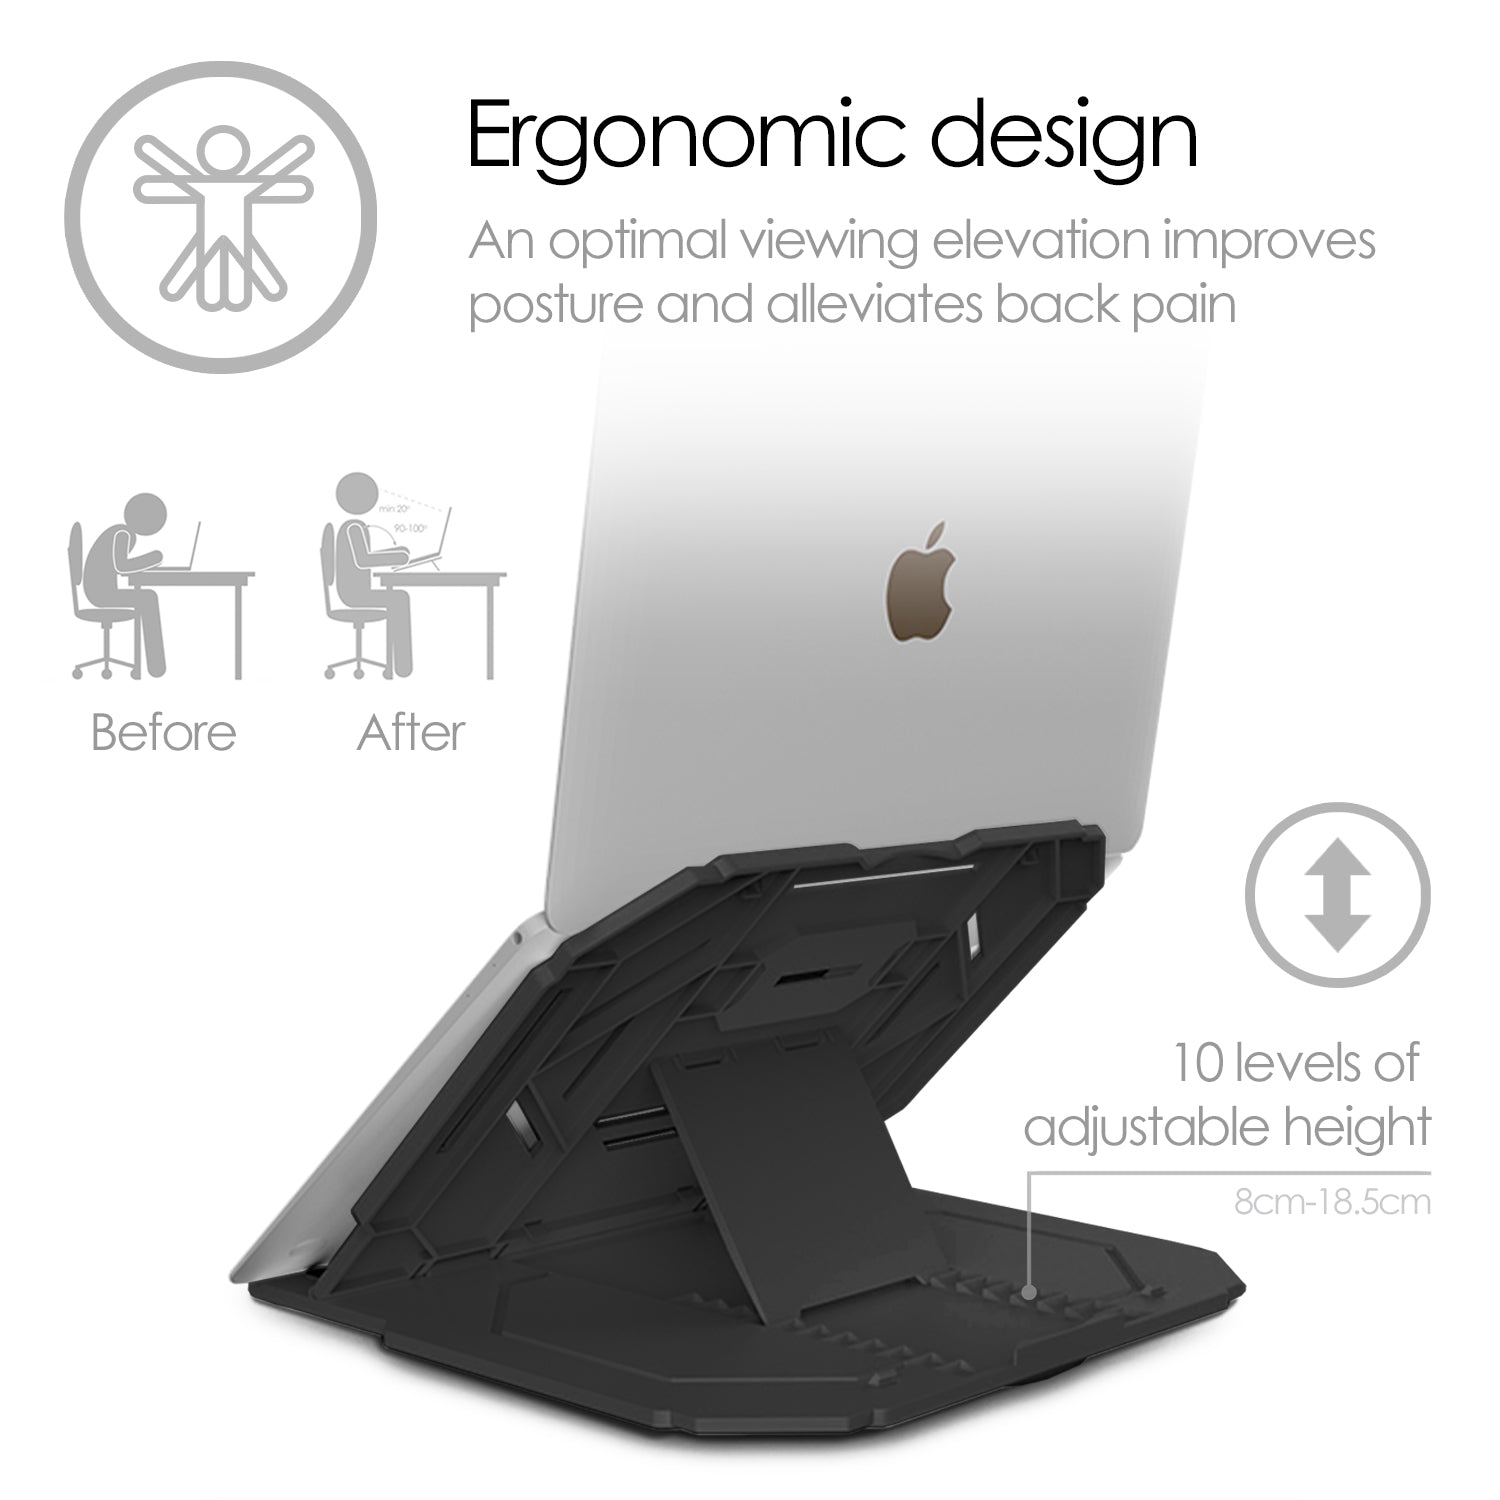 image of laptop stand showing how the grooves in the design allow for 10 different levels  of height adjustment.  text reads "ergonomic design - An optimal viewing elevation improves posture and alleviates back pain" 